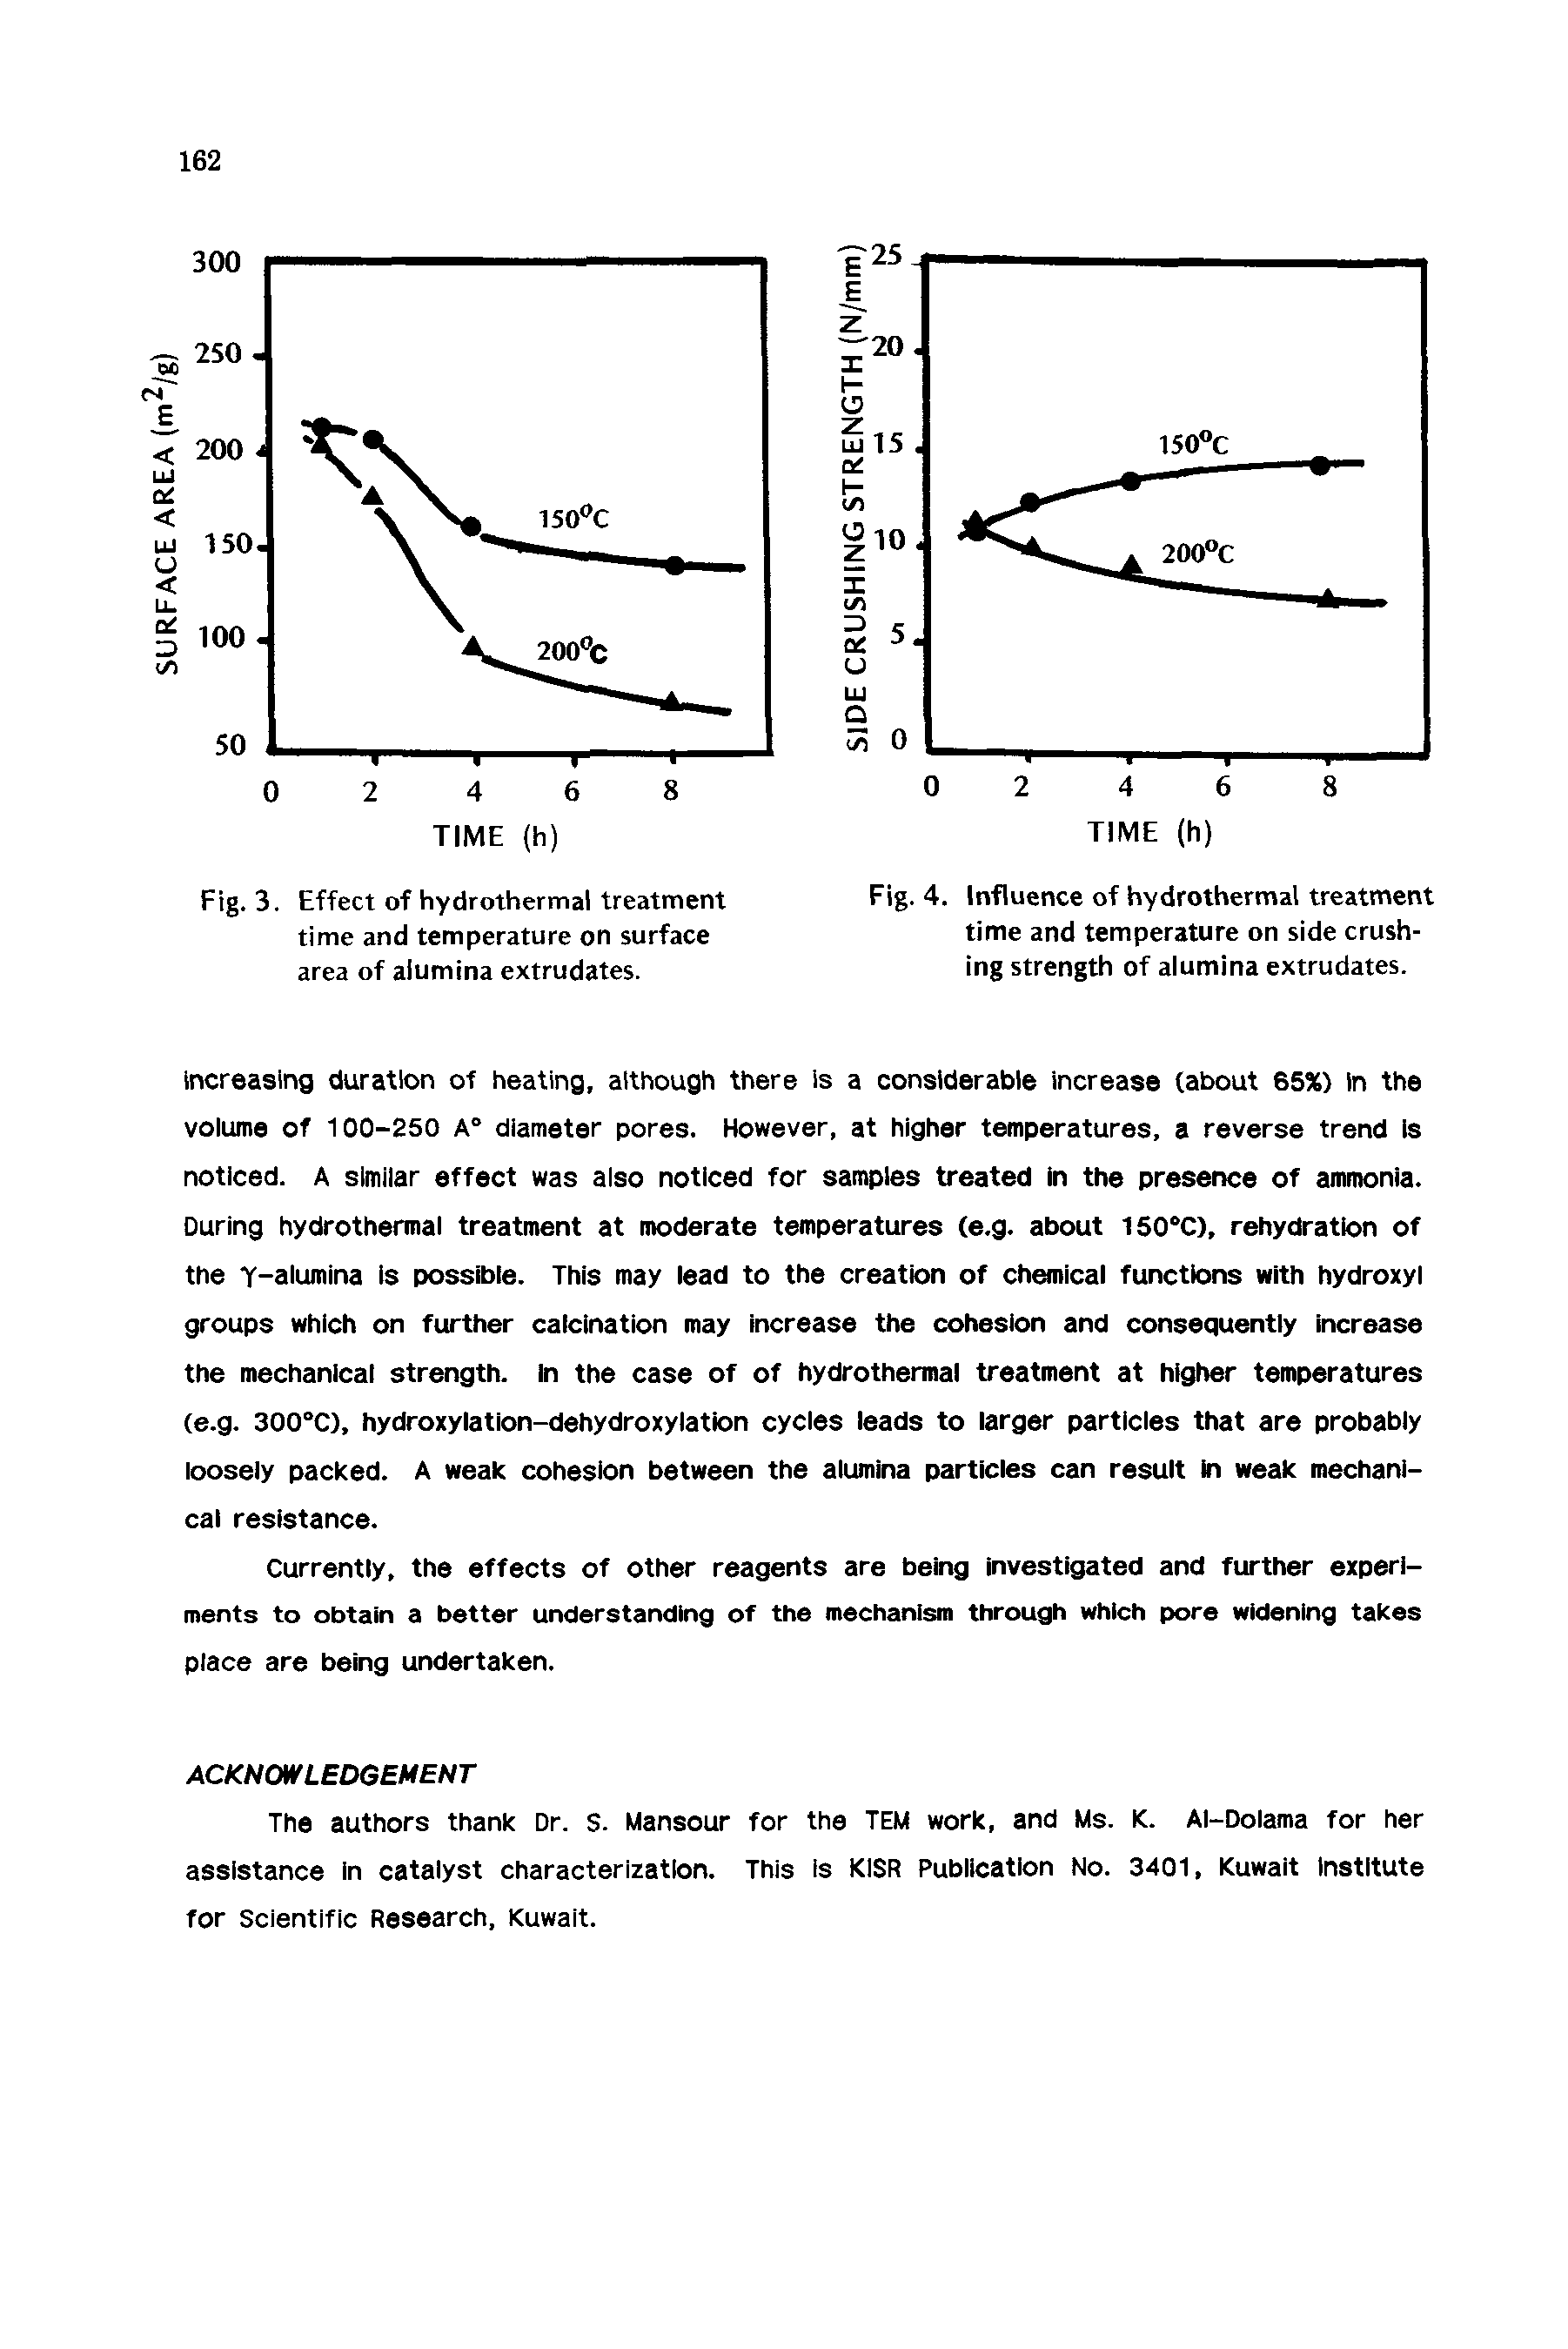 Fig. 3. Effect of hydrothermal treatment time and temperature on surface area of alumina extrudates.